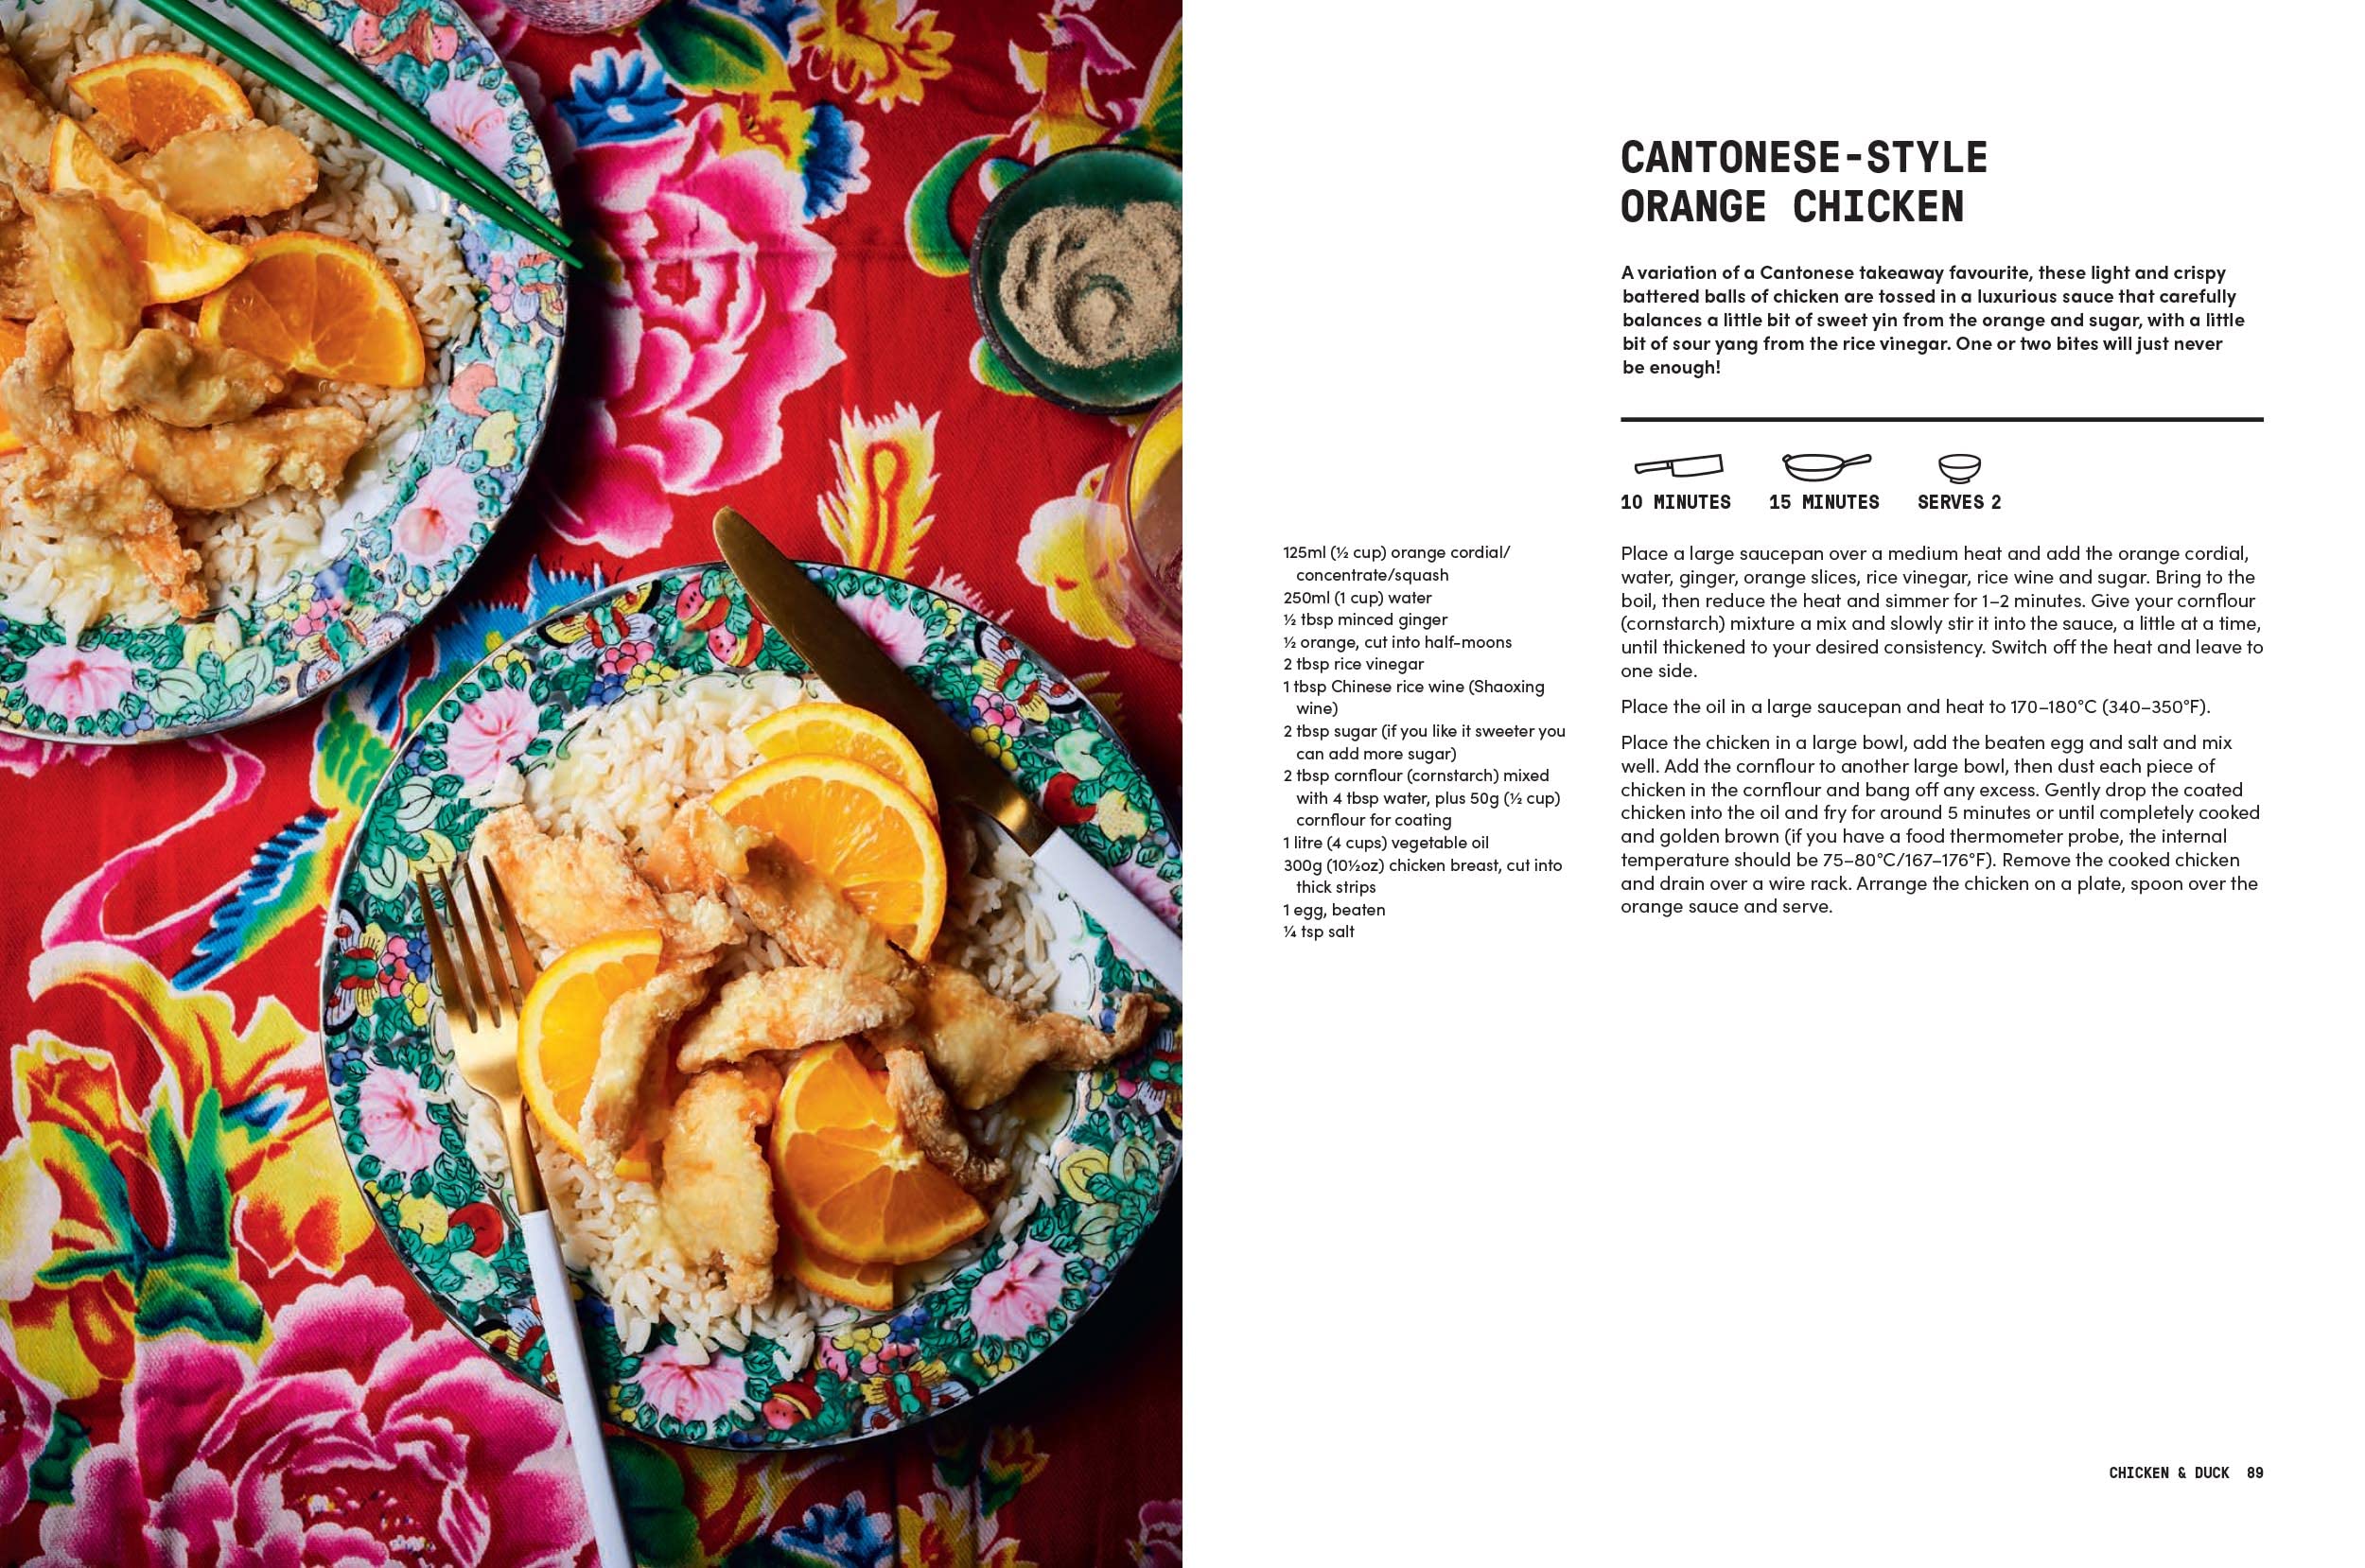 The Complete Chinese Takeaway Cookbook